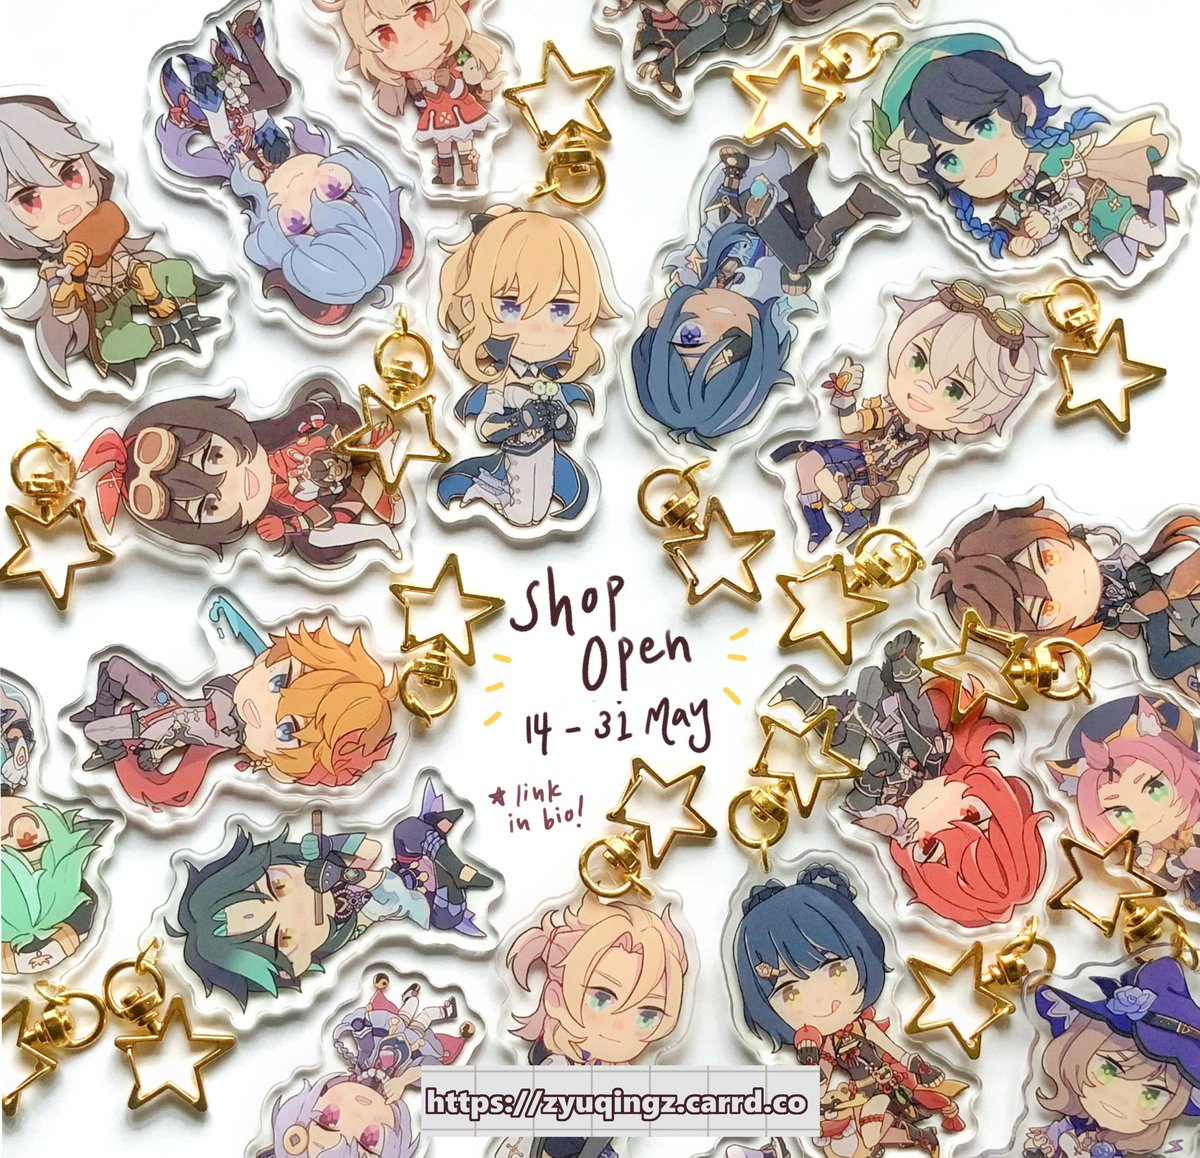 🌟RTs & Likes Appreciated!🌟
My shop opened today!! I have a lot of charm designs up for Preorder + some wack stickers, selling some Kaebedo prints too ❄️✨
The link is on my carrd in my bio!
#GenshinImpact #原神 